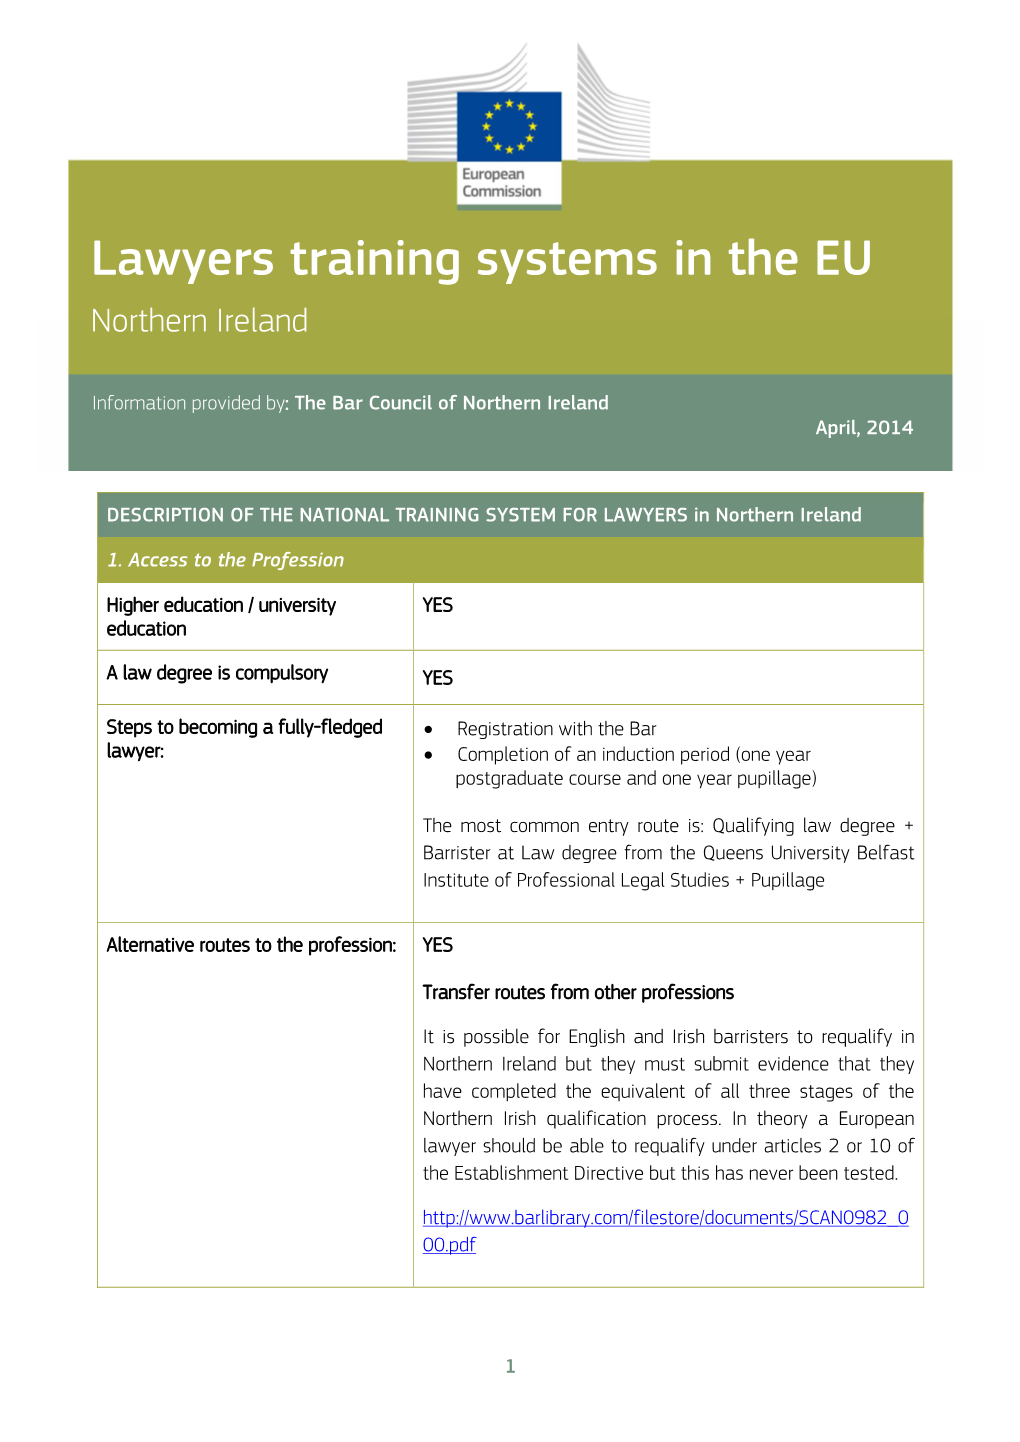 Lawyers Training Systems in the EU Northern Ireland